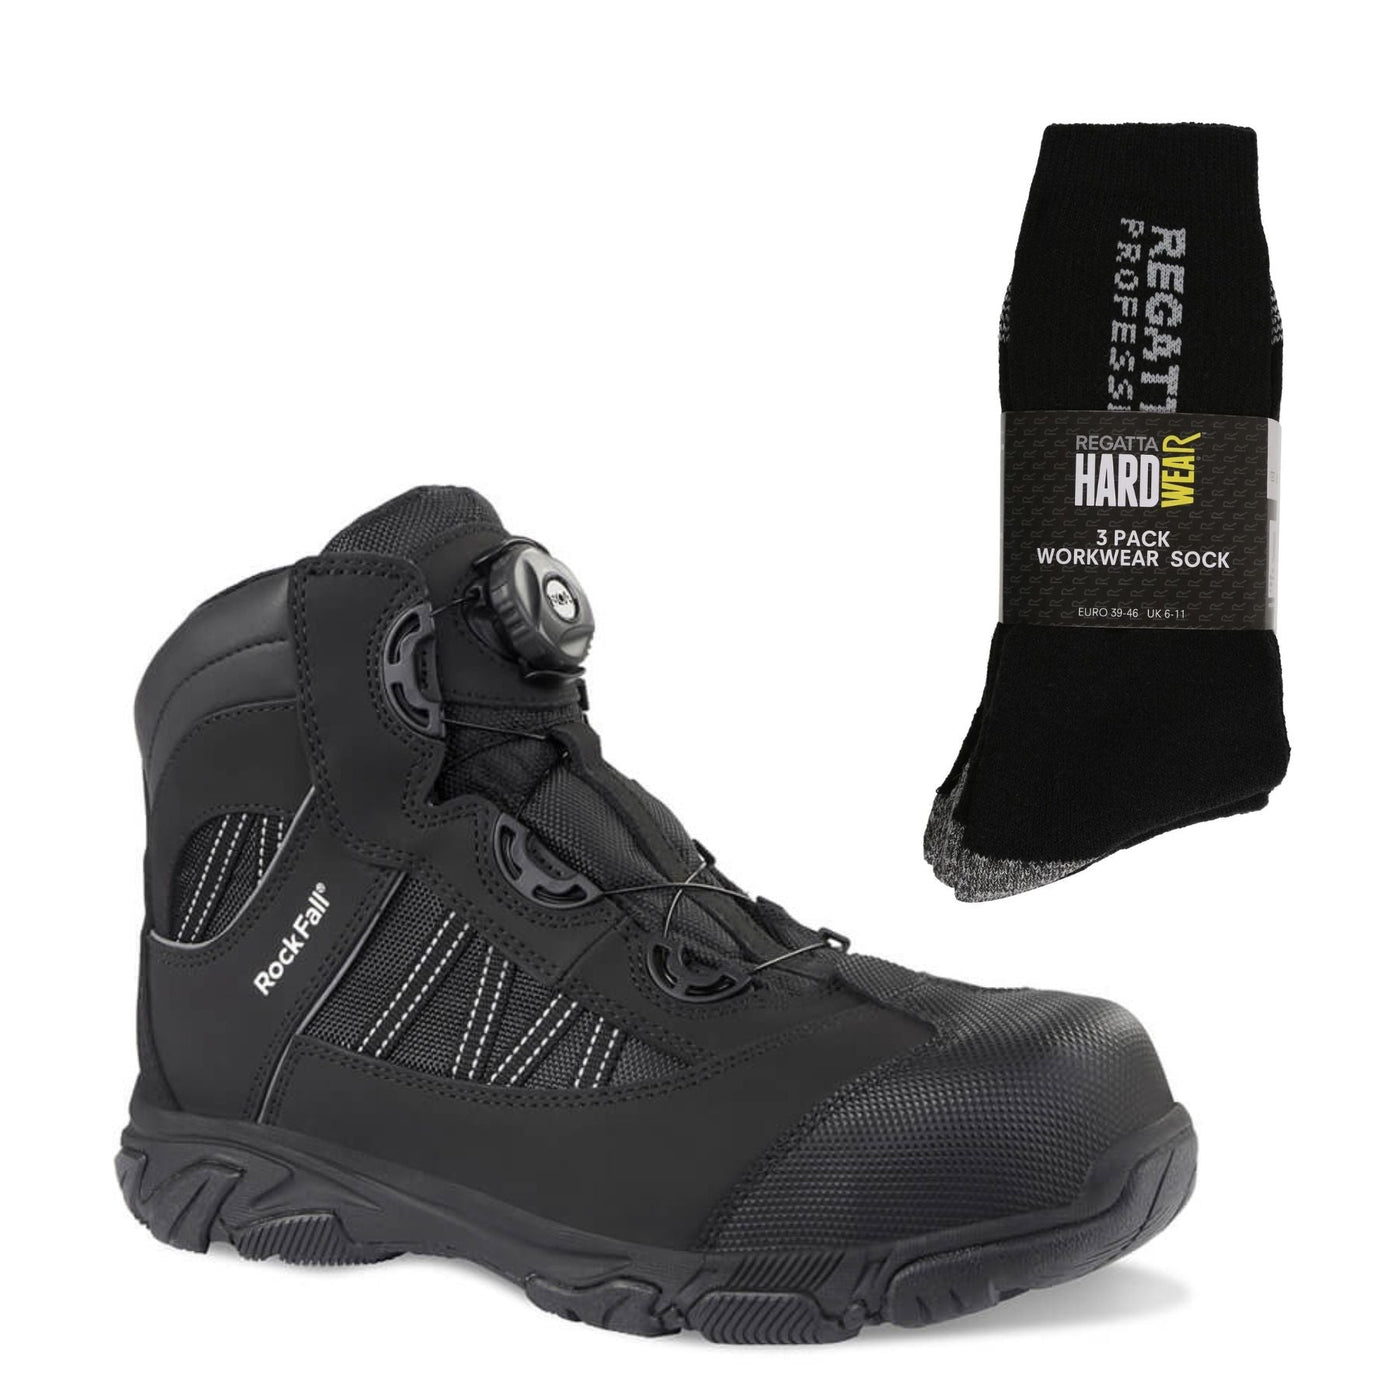 RockFall Ohm Special Offer Pack - RF160 Electrical Hazard BOA Work Boots + 3 Pairs Work Socks